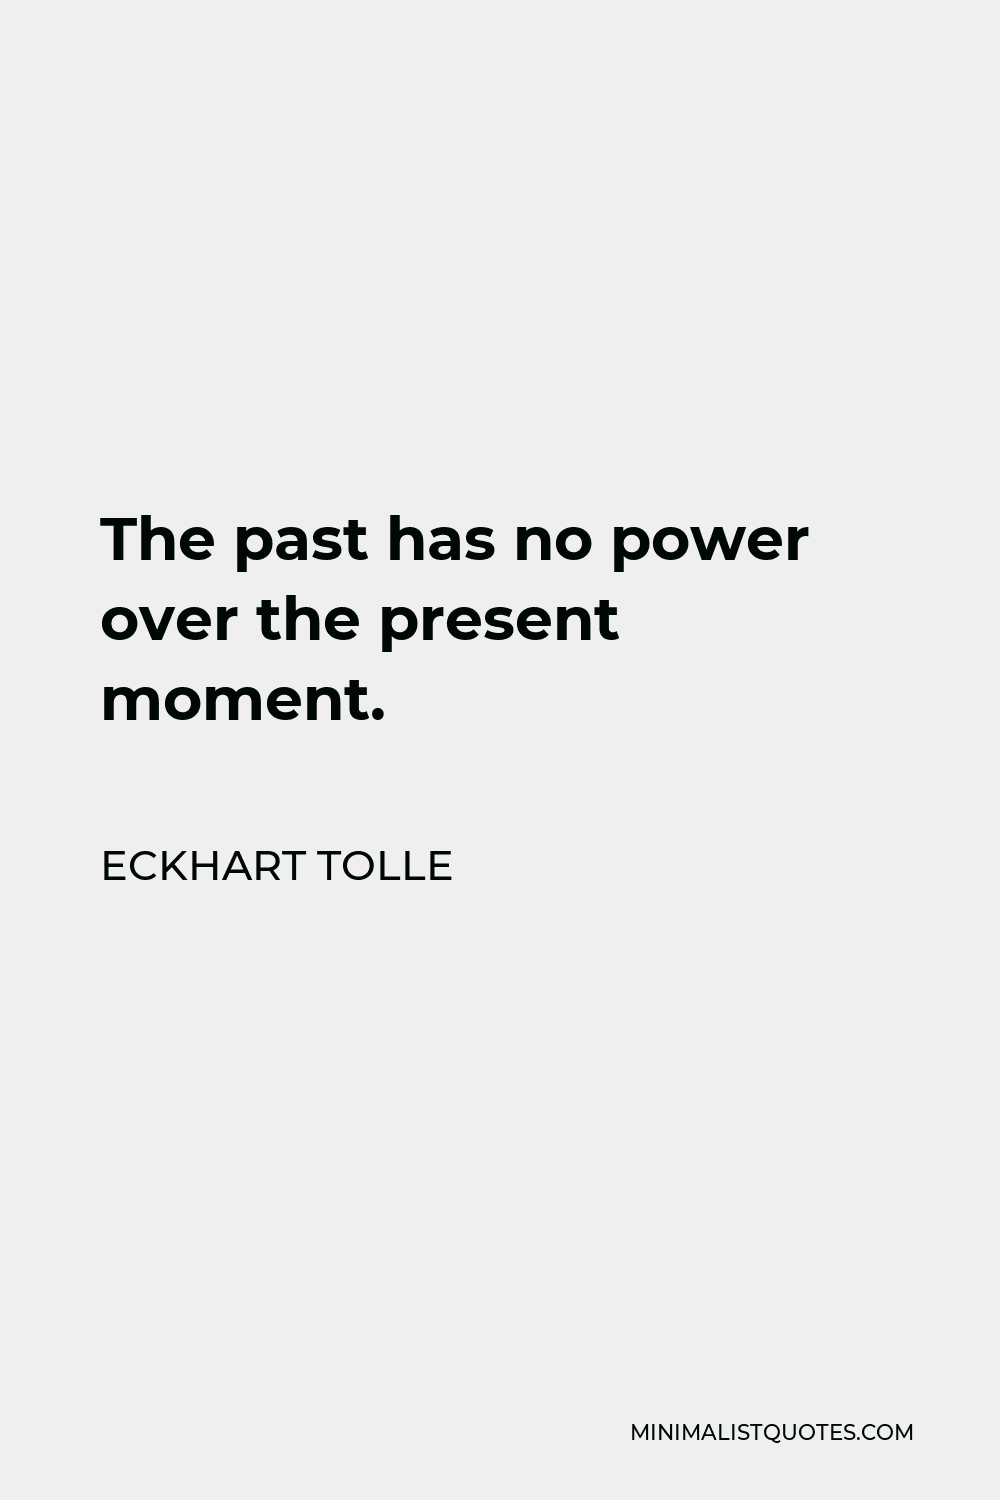 Eckhart Tolle Quote: The past has no power over the present moment.